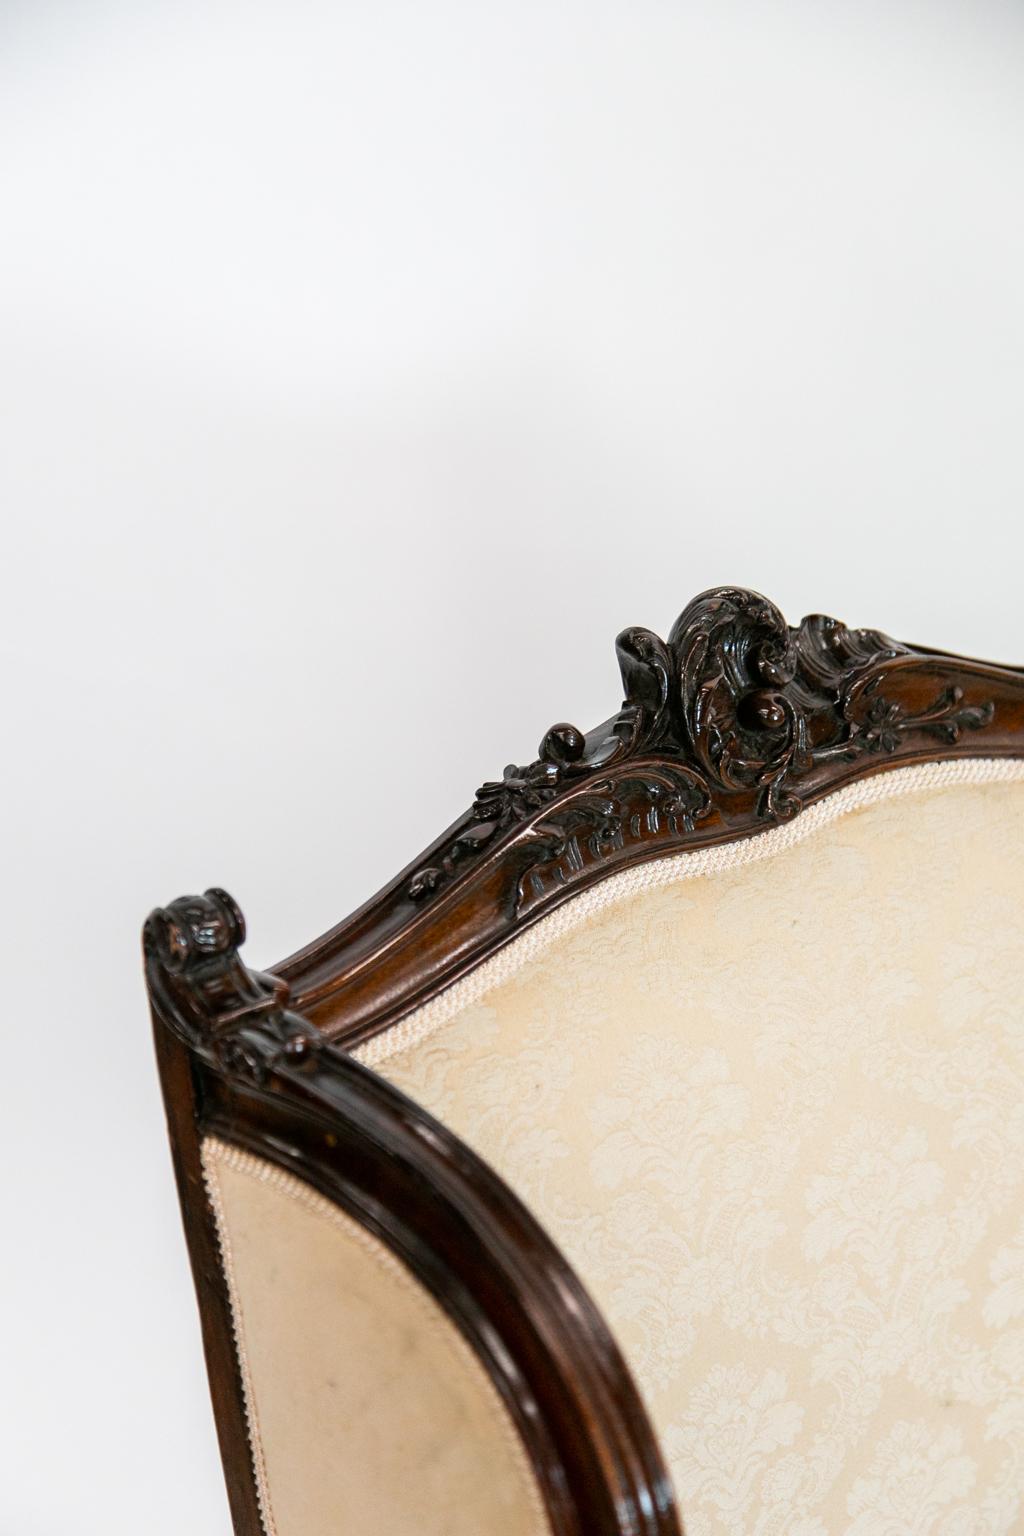 This carved French slipper armchair has detailed carving all-over using floral and leaf motifs. The front has a serpentine apron and the cabriole legs terminate in scrolled feet. It has been recently reupholstered in an ivory damask.